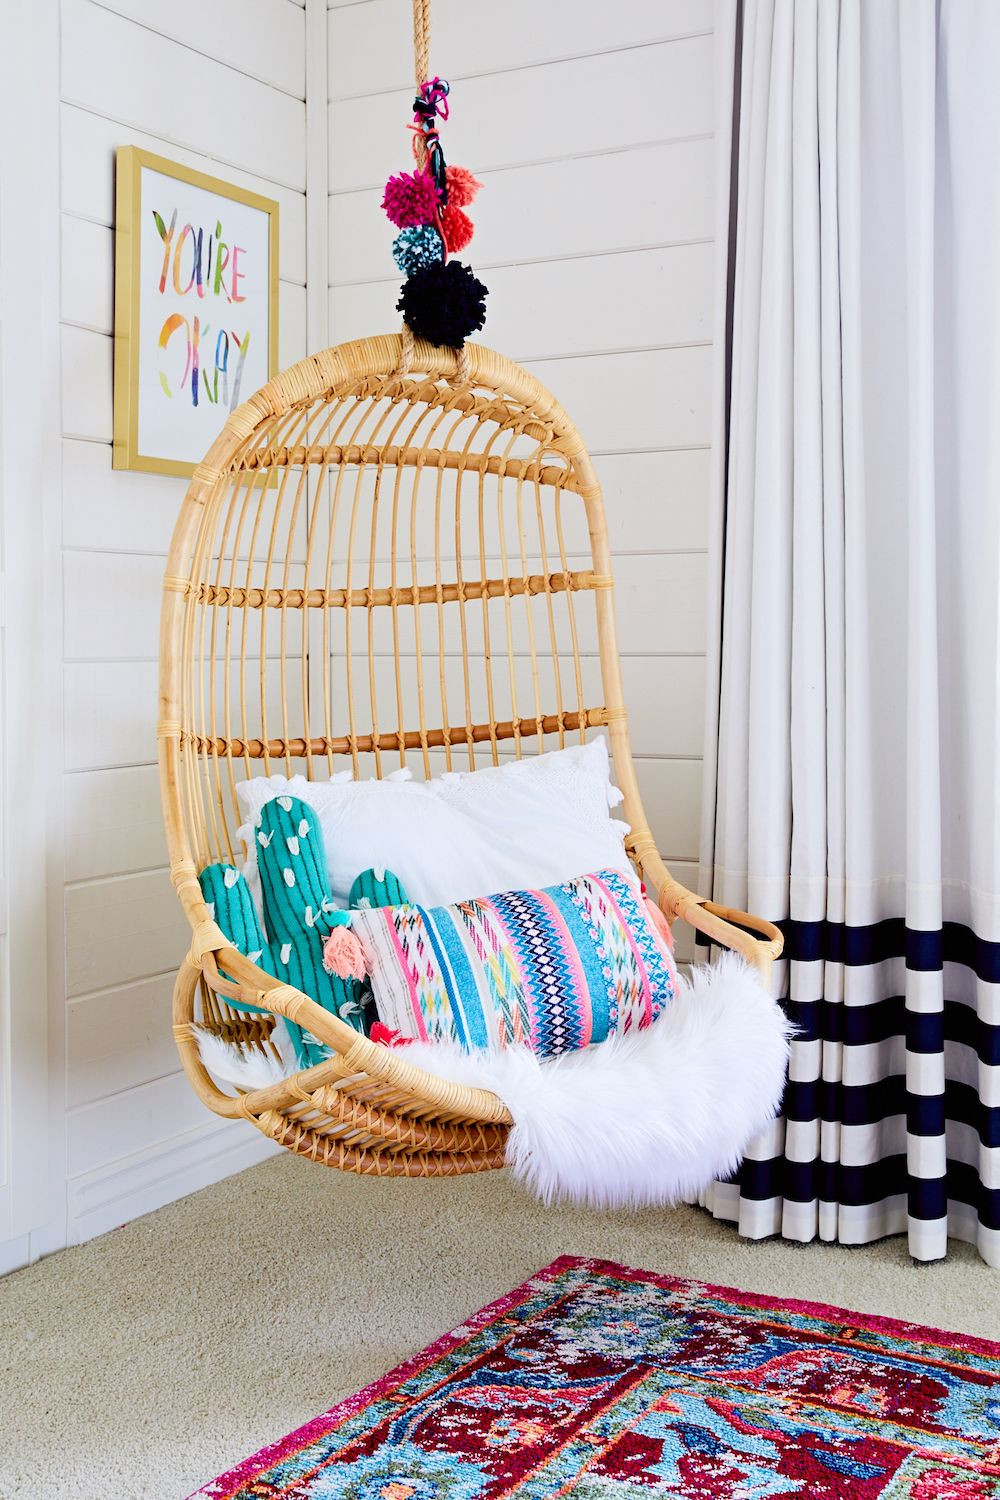 Kids Room Chair
 Trendspotting Hanging Chairs are Swinging into Kids